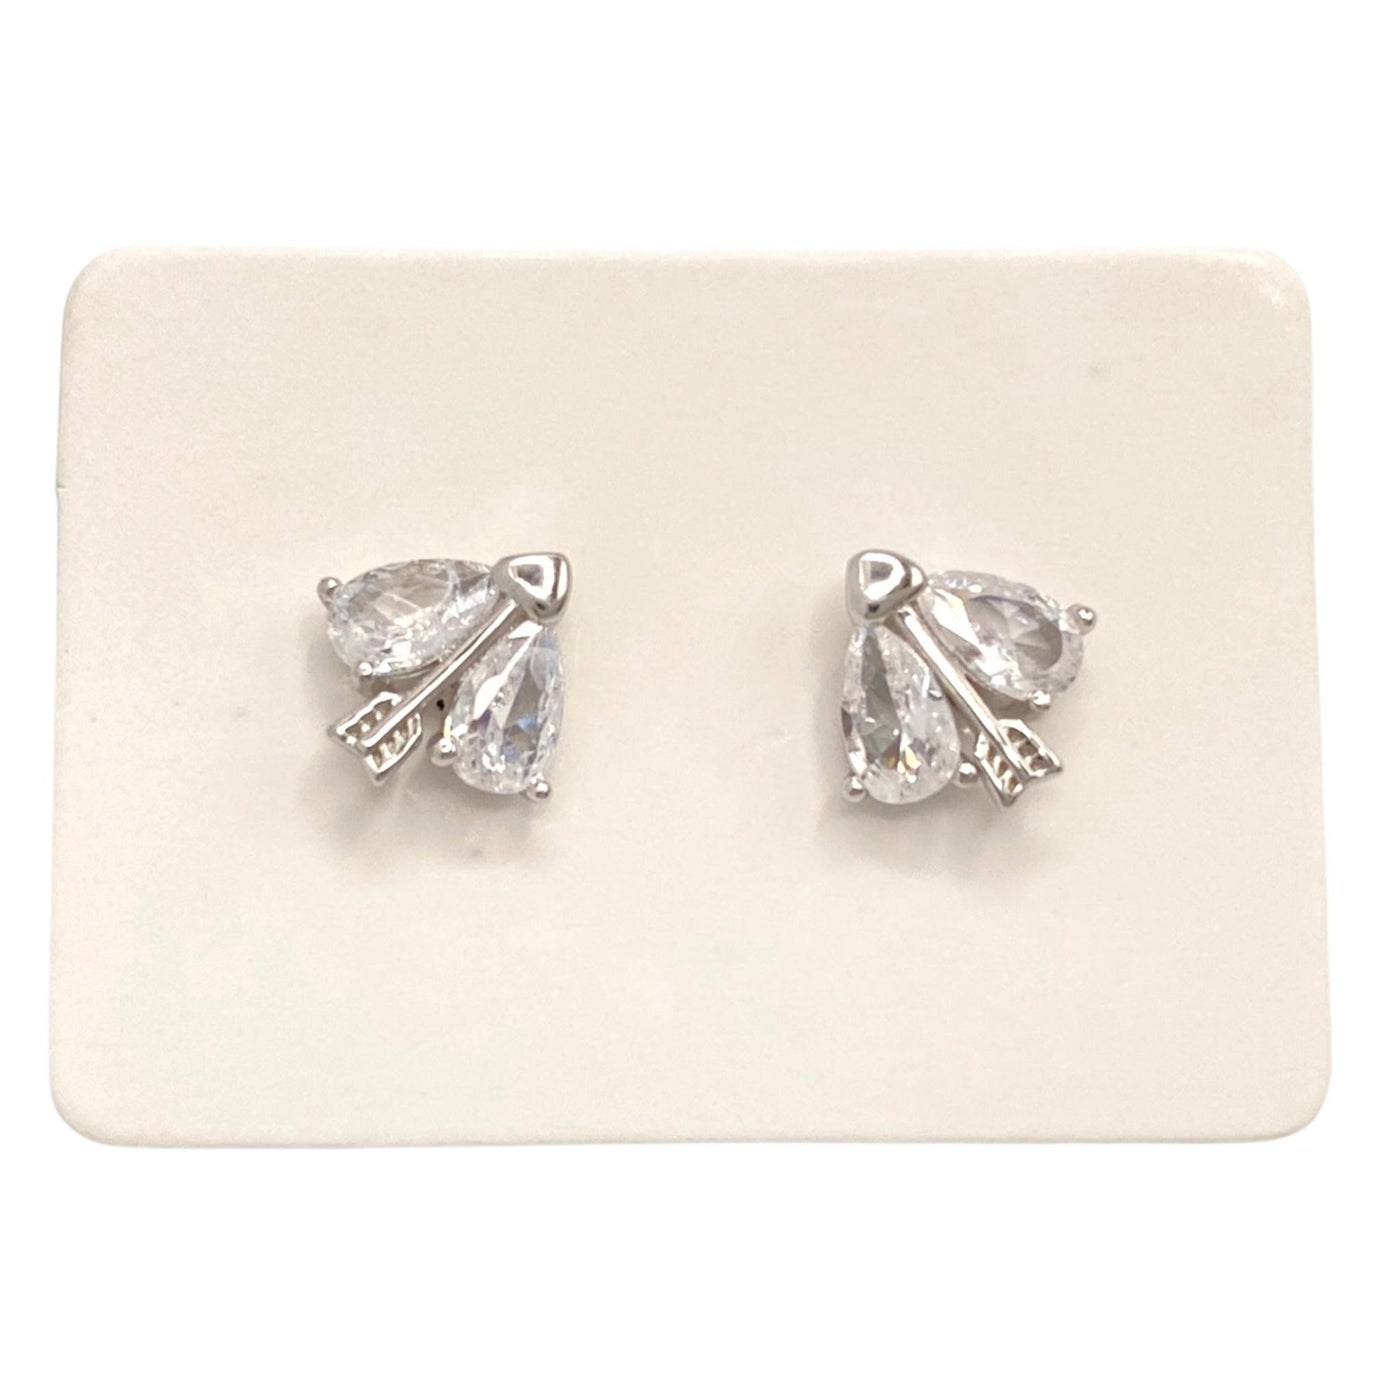 Pack of 5 silver stud earrings with heart and arrow